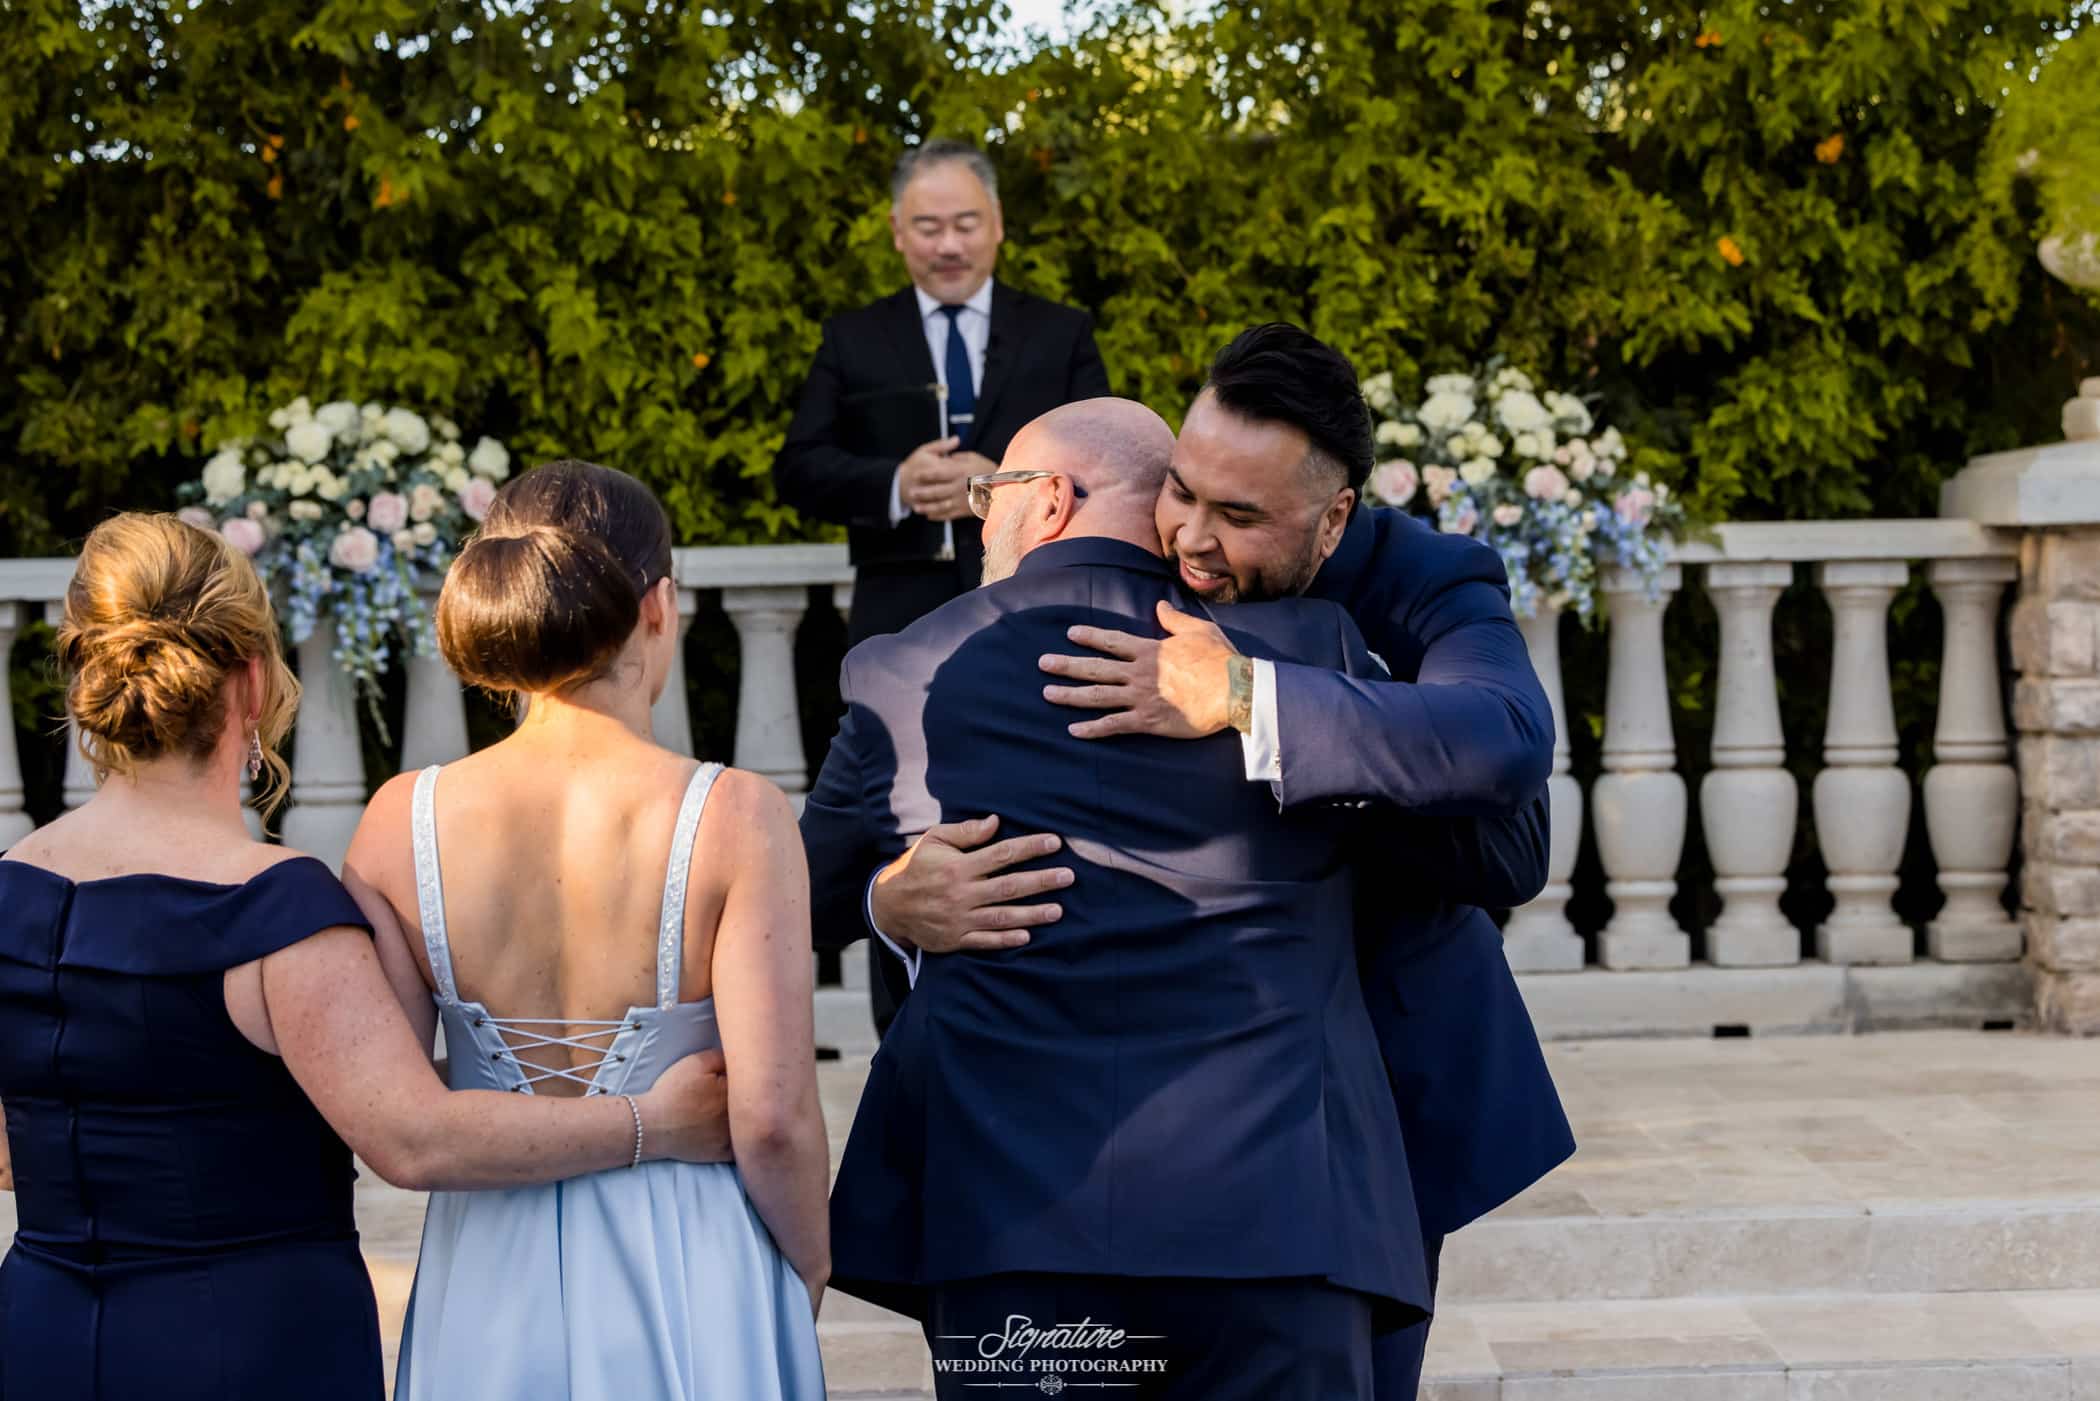 Groom hugging father in law